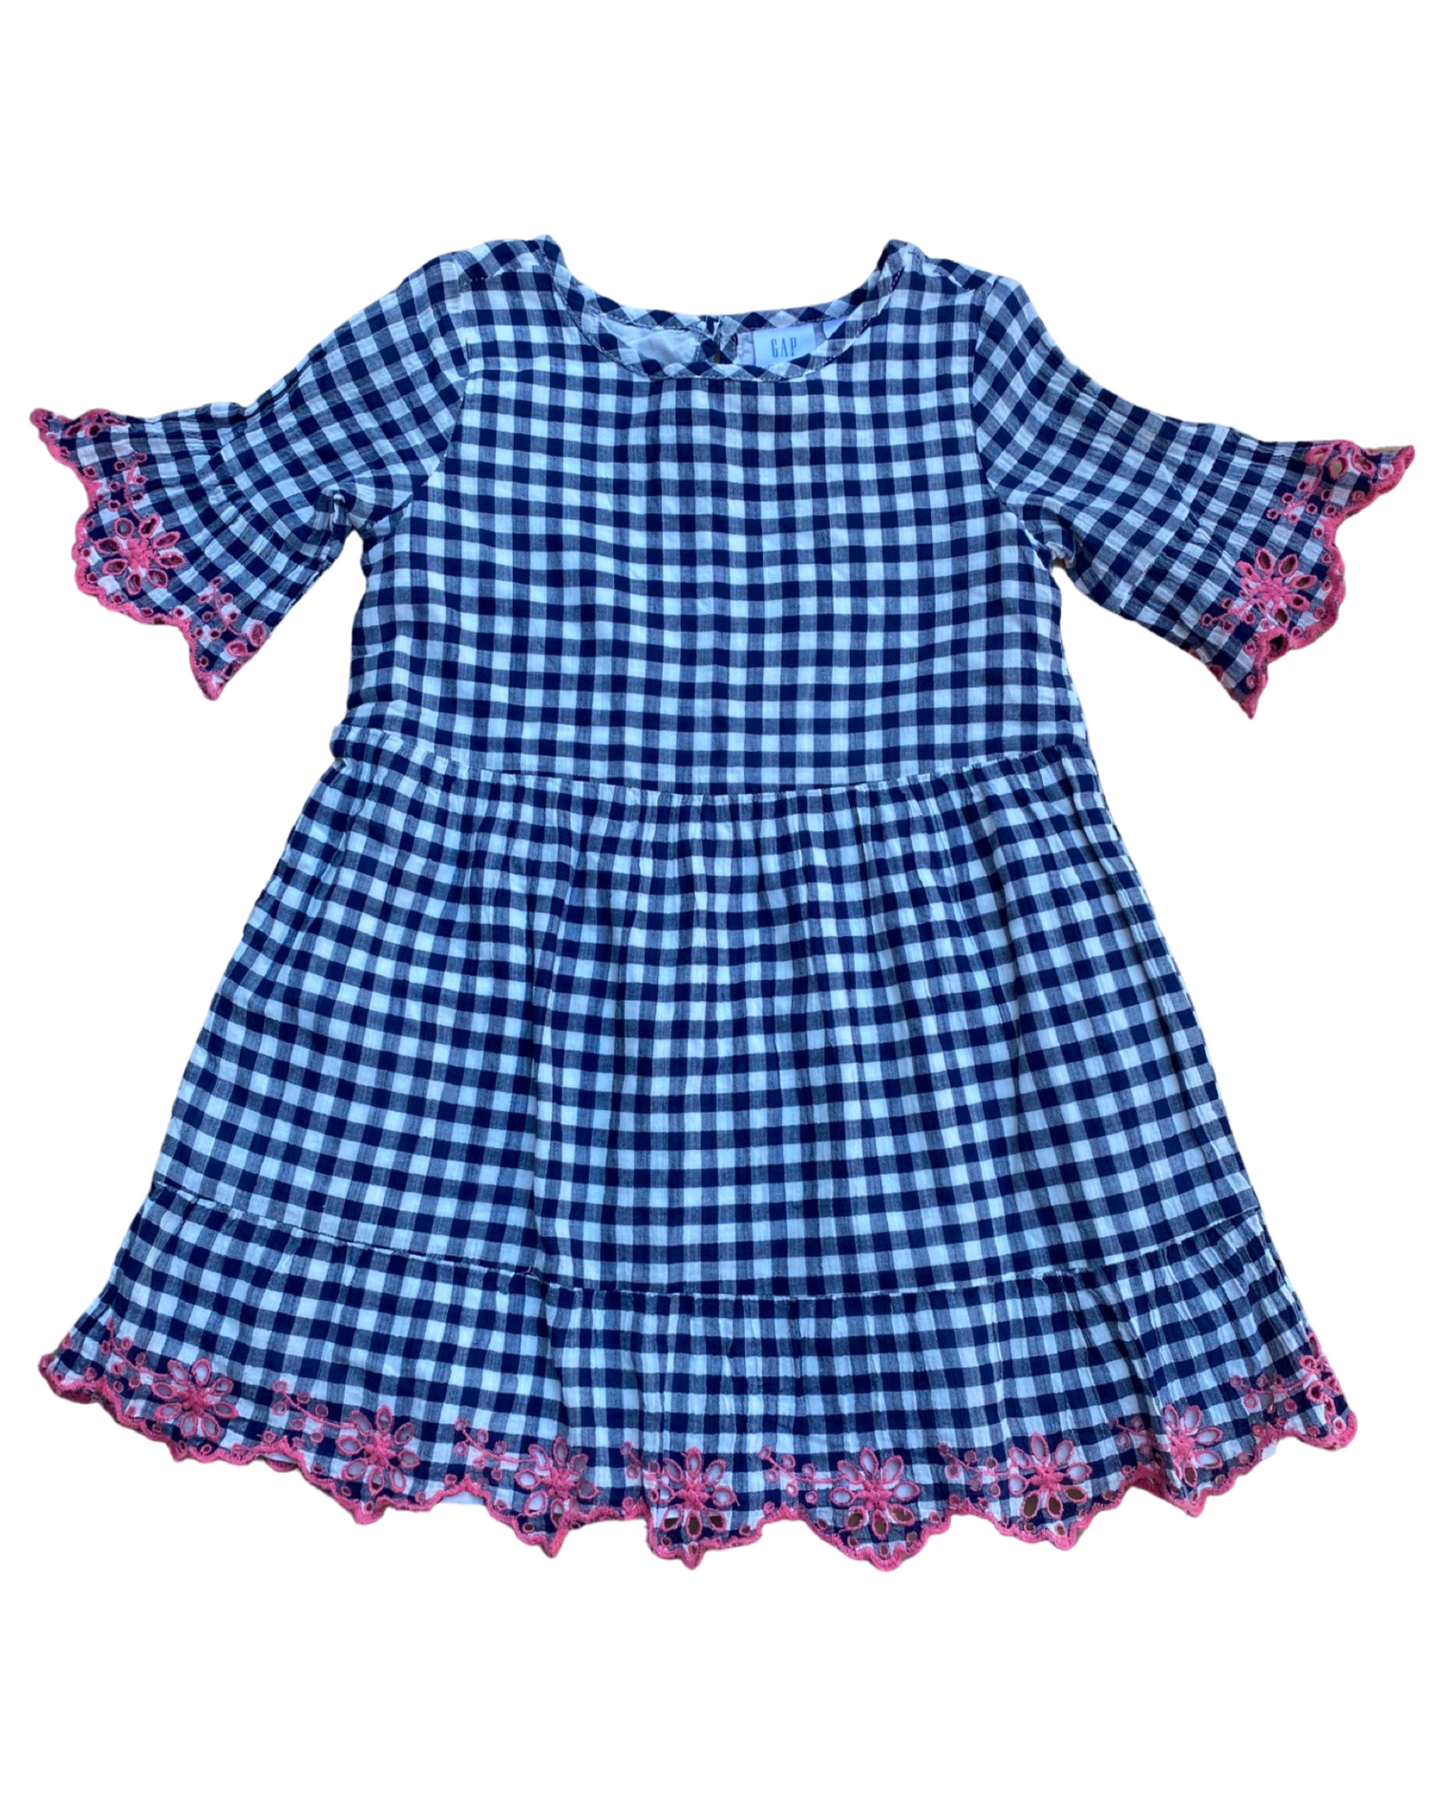 Baby Gap x SJP checked gingham dress with eyelet lace trim (3-4yrs)